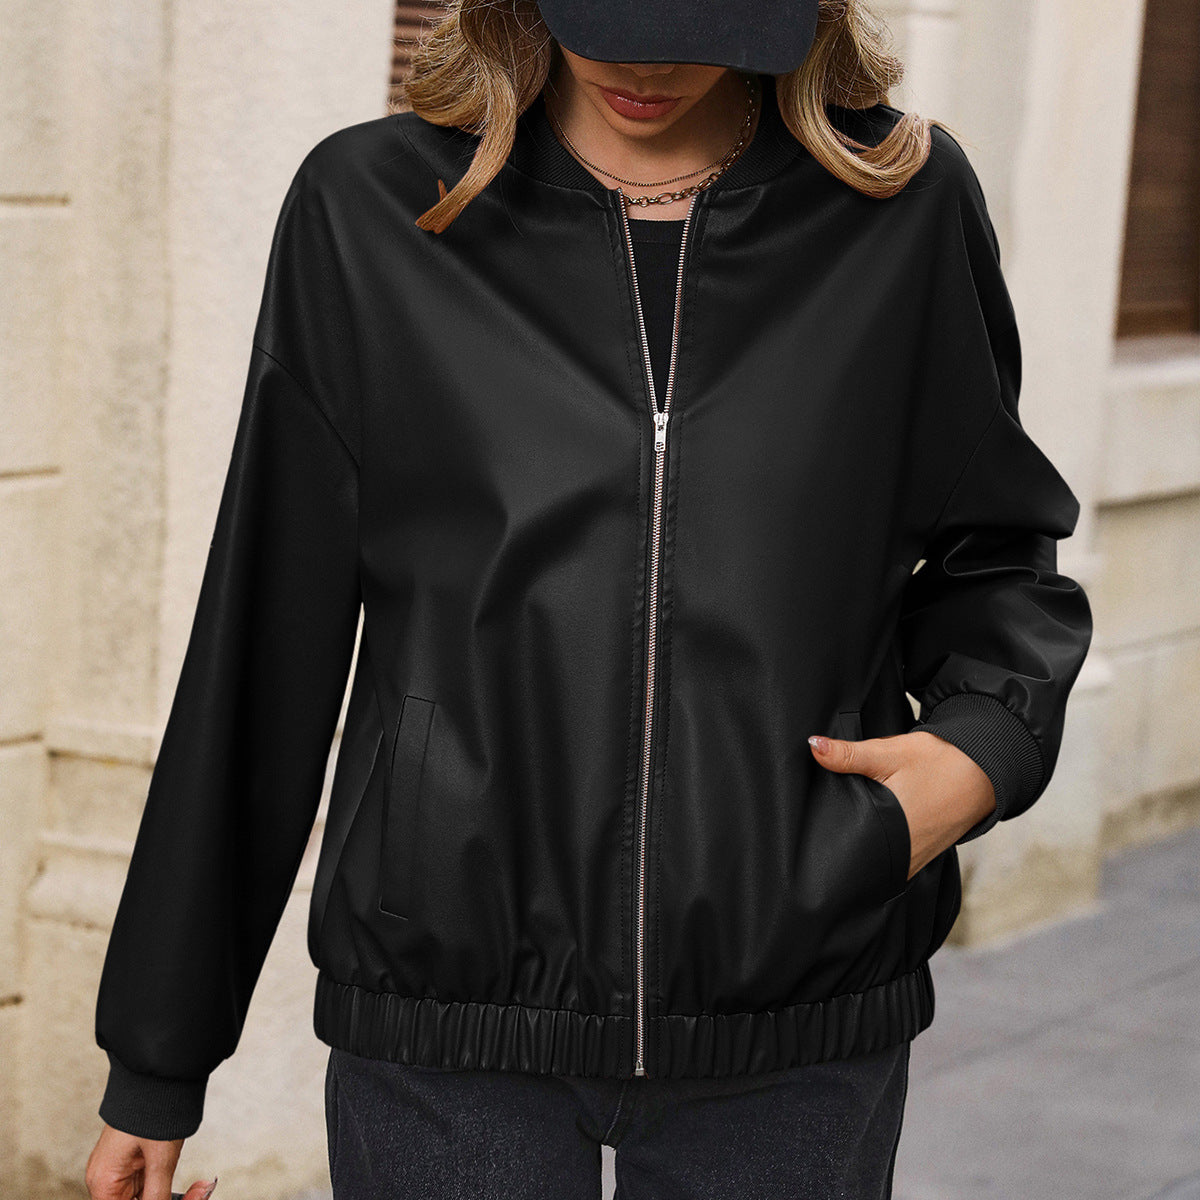 Casual Short Long Sleeve Faux Leather Motorcycle Leather Jacket Coat Top Women